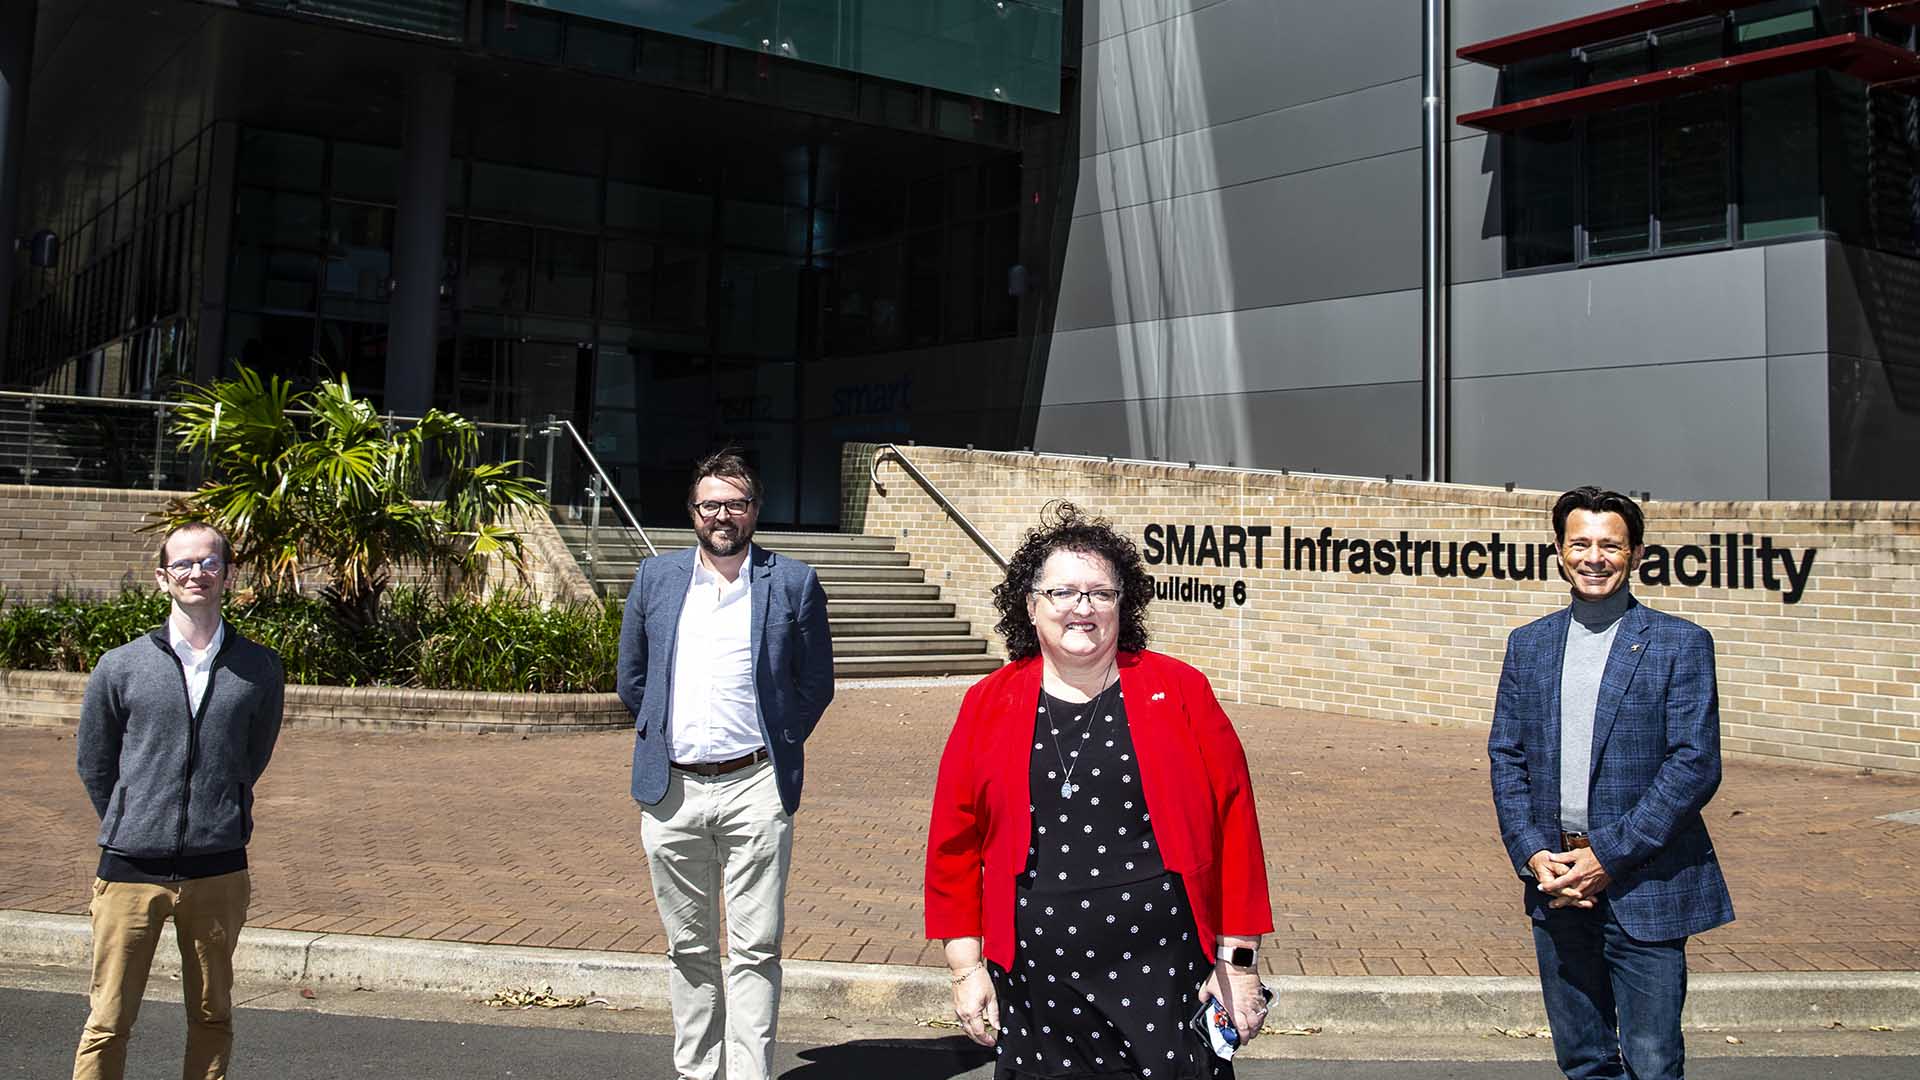 Johan Barthelemy, Iain Russell, Tania Brown, Pascal Perez at the SMART Infrastructure Facility for the launch of the Telstra-UOW Hub for AIOT Solutions